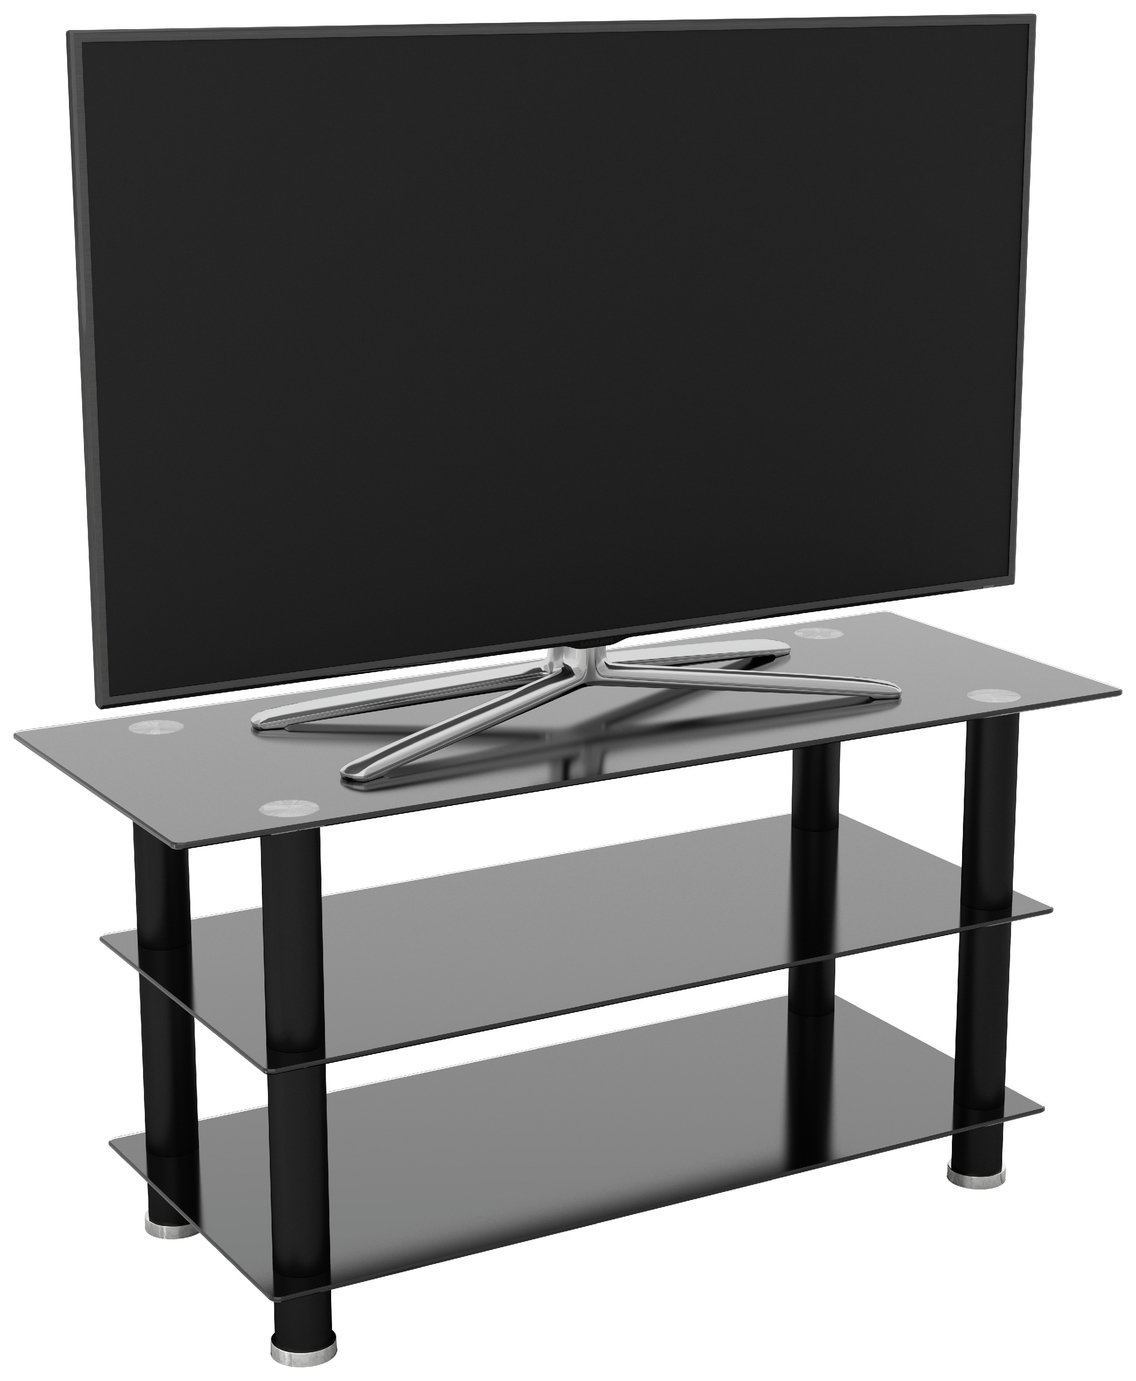 AVF Glass up to 50 Inch TV Stand Review